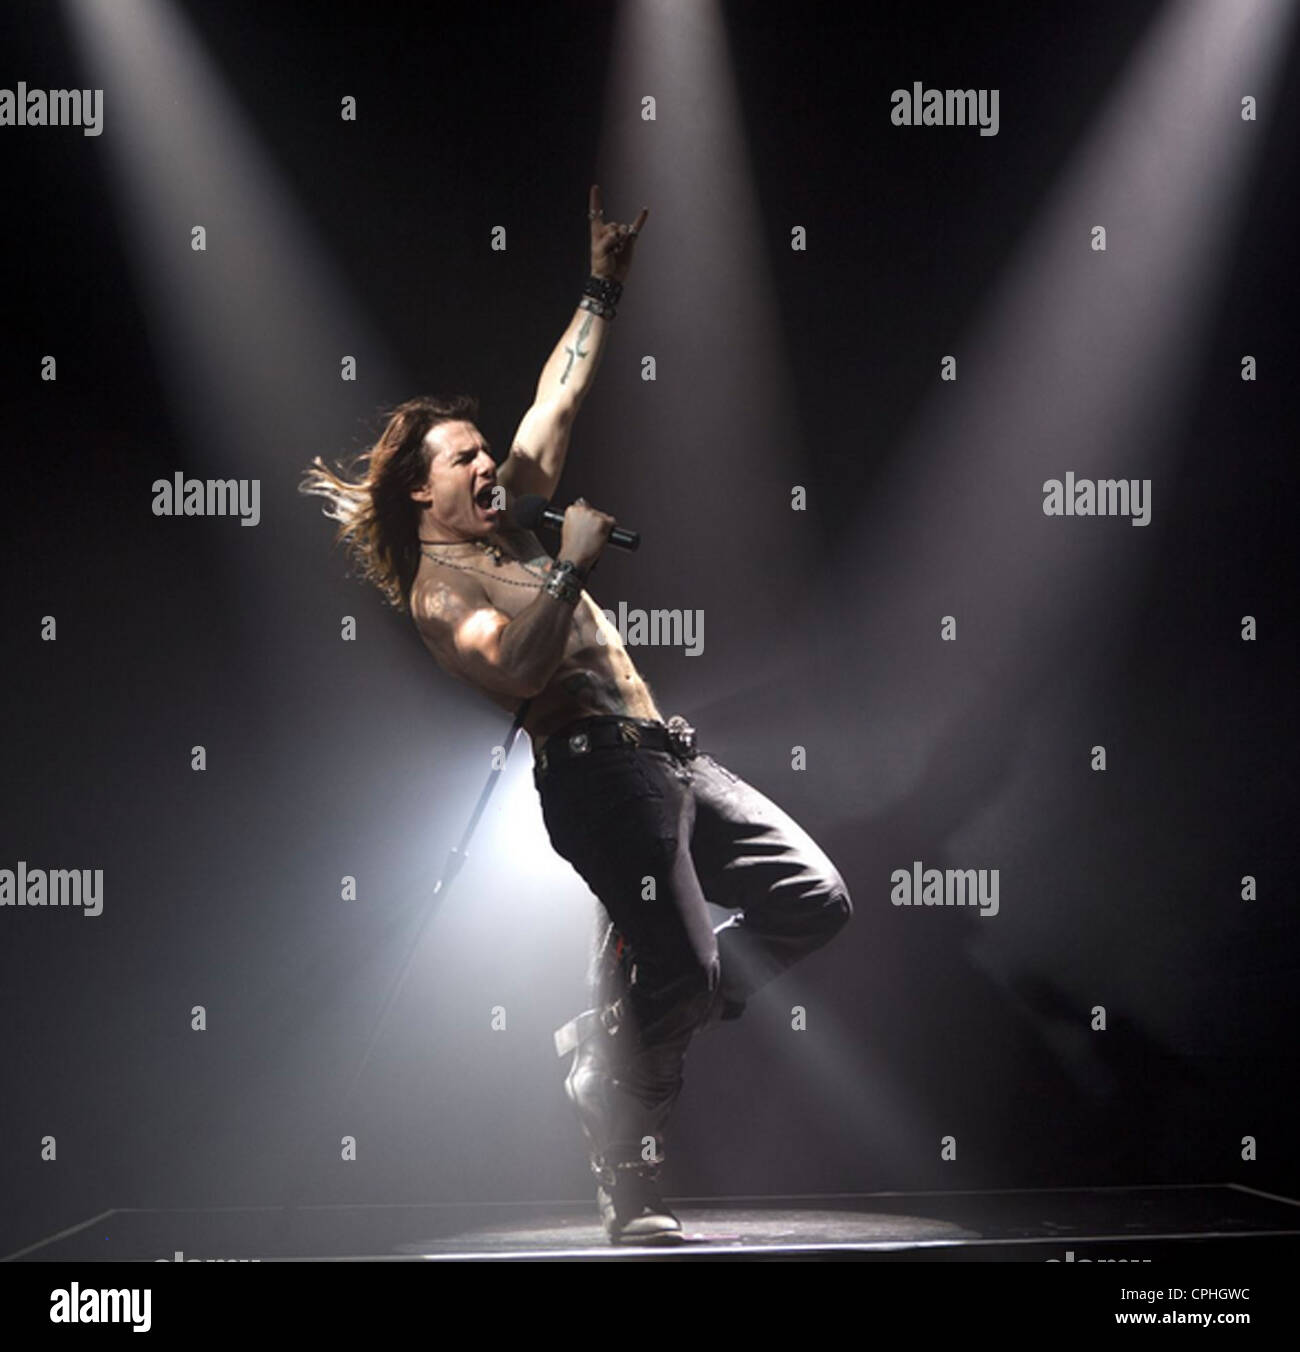 ROCK OF AGES 2012 Warner Bros film con Tom Cruise Foto Stock